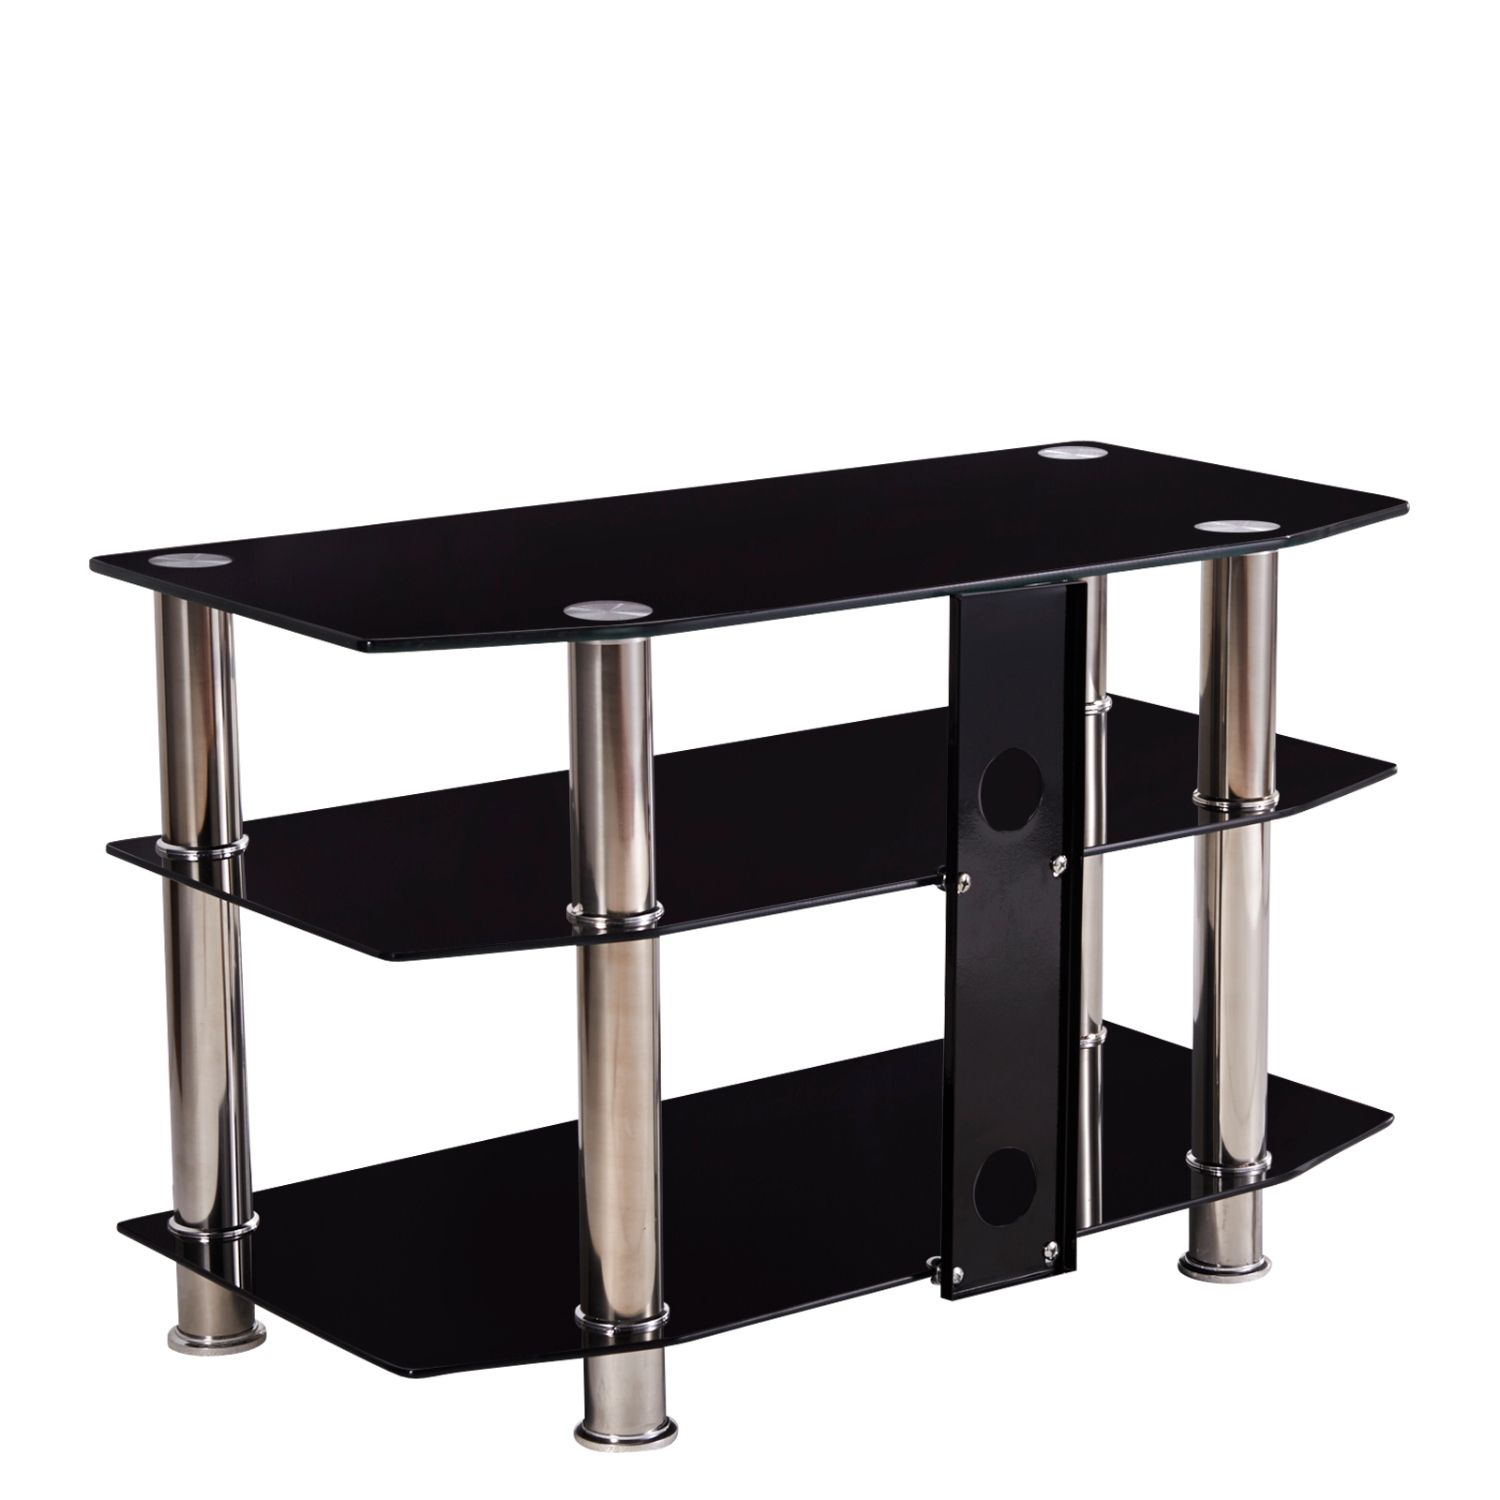 New Black 3 Tier Shelves Tempered Glass Tv Stand For 15 Pertaining To Black Glass Tv Stands (View 13 of 15)